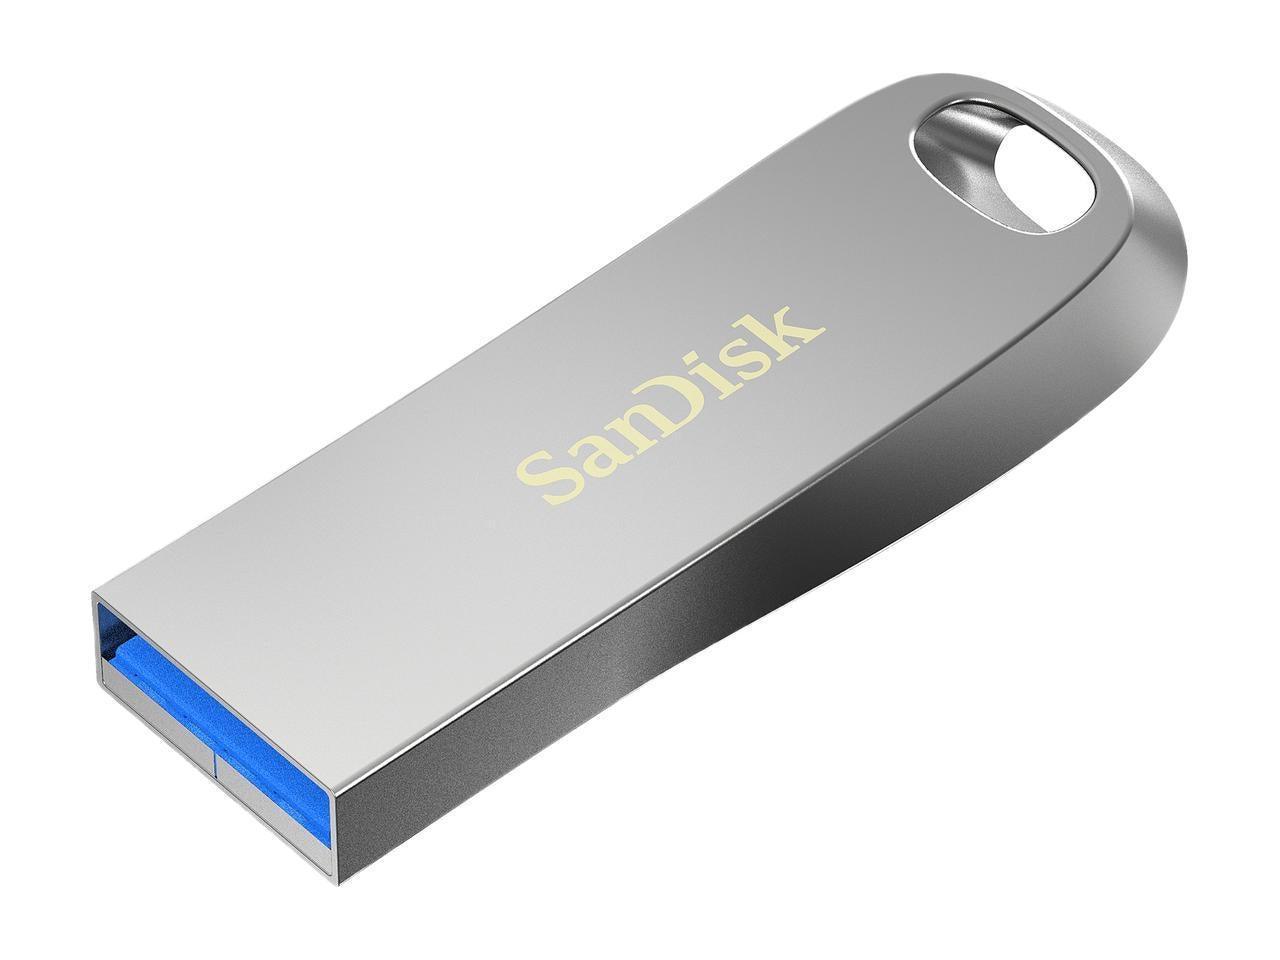 SANDISK SDCZ74-256G-G46 256G ULTRA LUXE PEN DRIVE 150MB USB 3.0 METAL